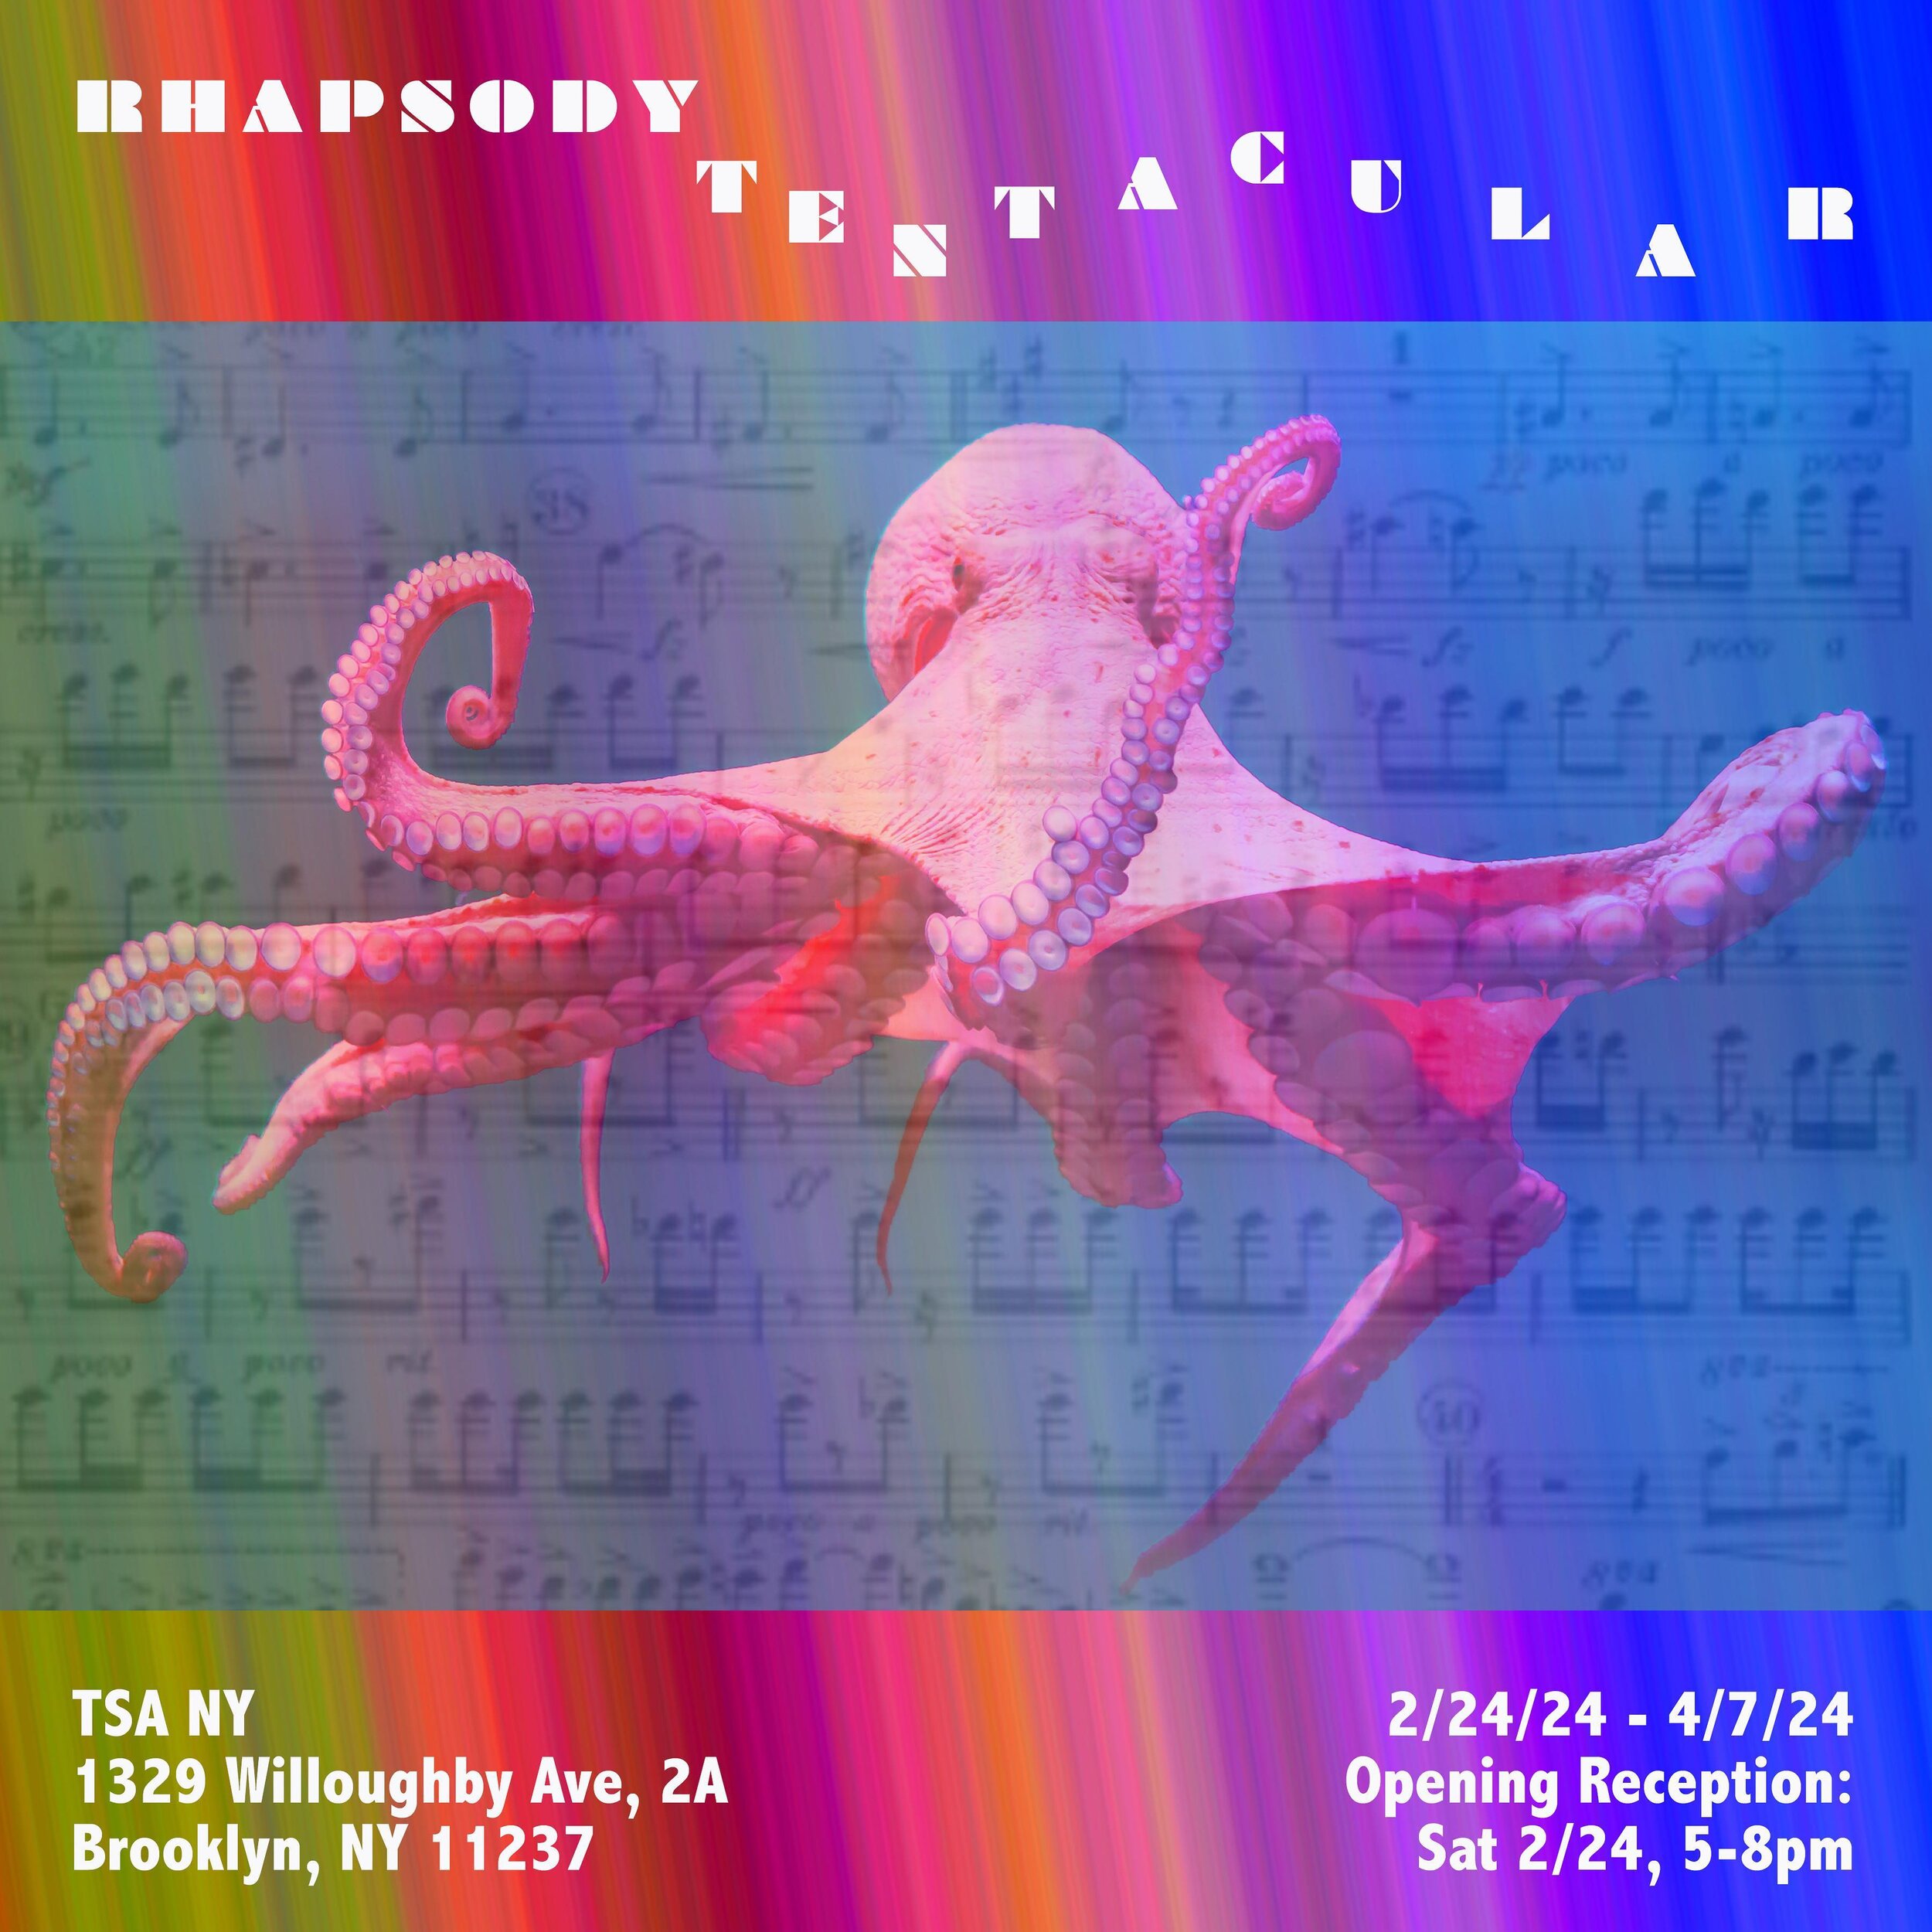 Very excited to be providing a sound piece for this!  7th arm!
&hearts;️🌸🎵 Rhapsody Tentacular opens this
Saturday 2/24, 5-8pm!

Tiger Strikes Asteroid NY is pleased to present Rhapsody Tentacular, an experimental curation composed of eight variant